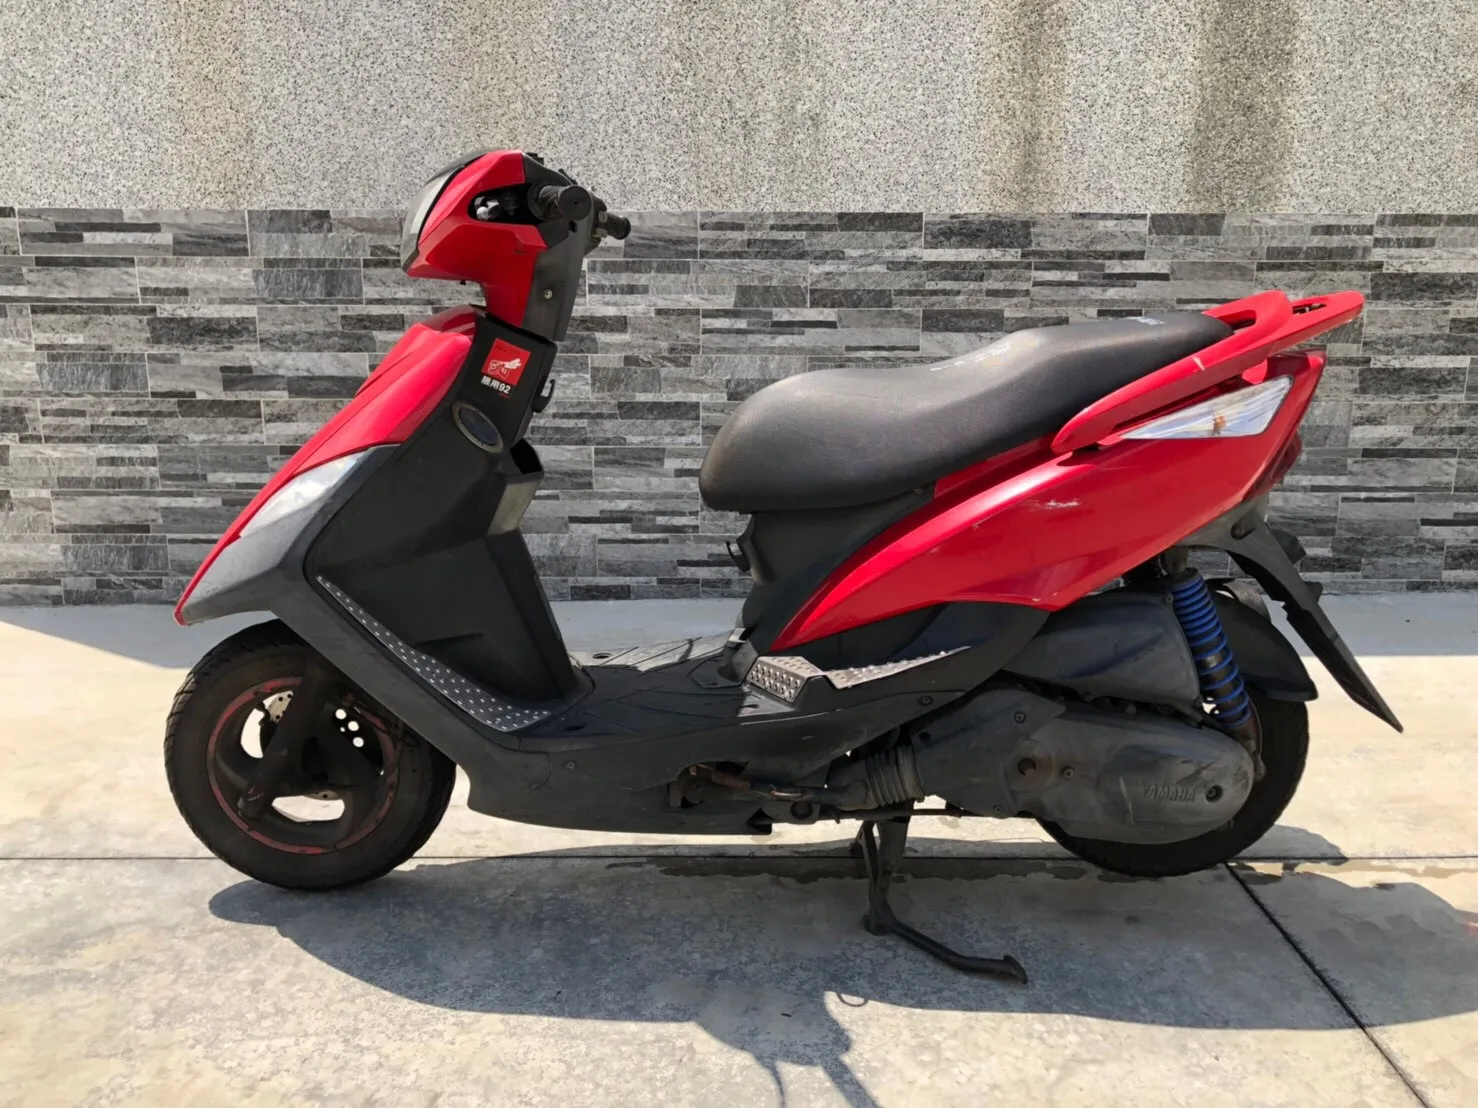 Used Motorcycle Gtr Gtrero 125cc Wholesale Scooter From Taiwan Buy Japan Used Scooter Kymco Or Sym Or Yamaha Motorbike Cheap From Taiwan 125cc Suzuki Scooters Product On Alibaba Com